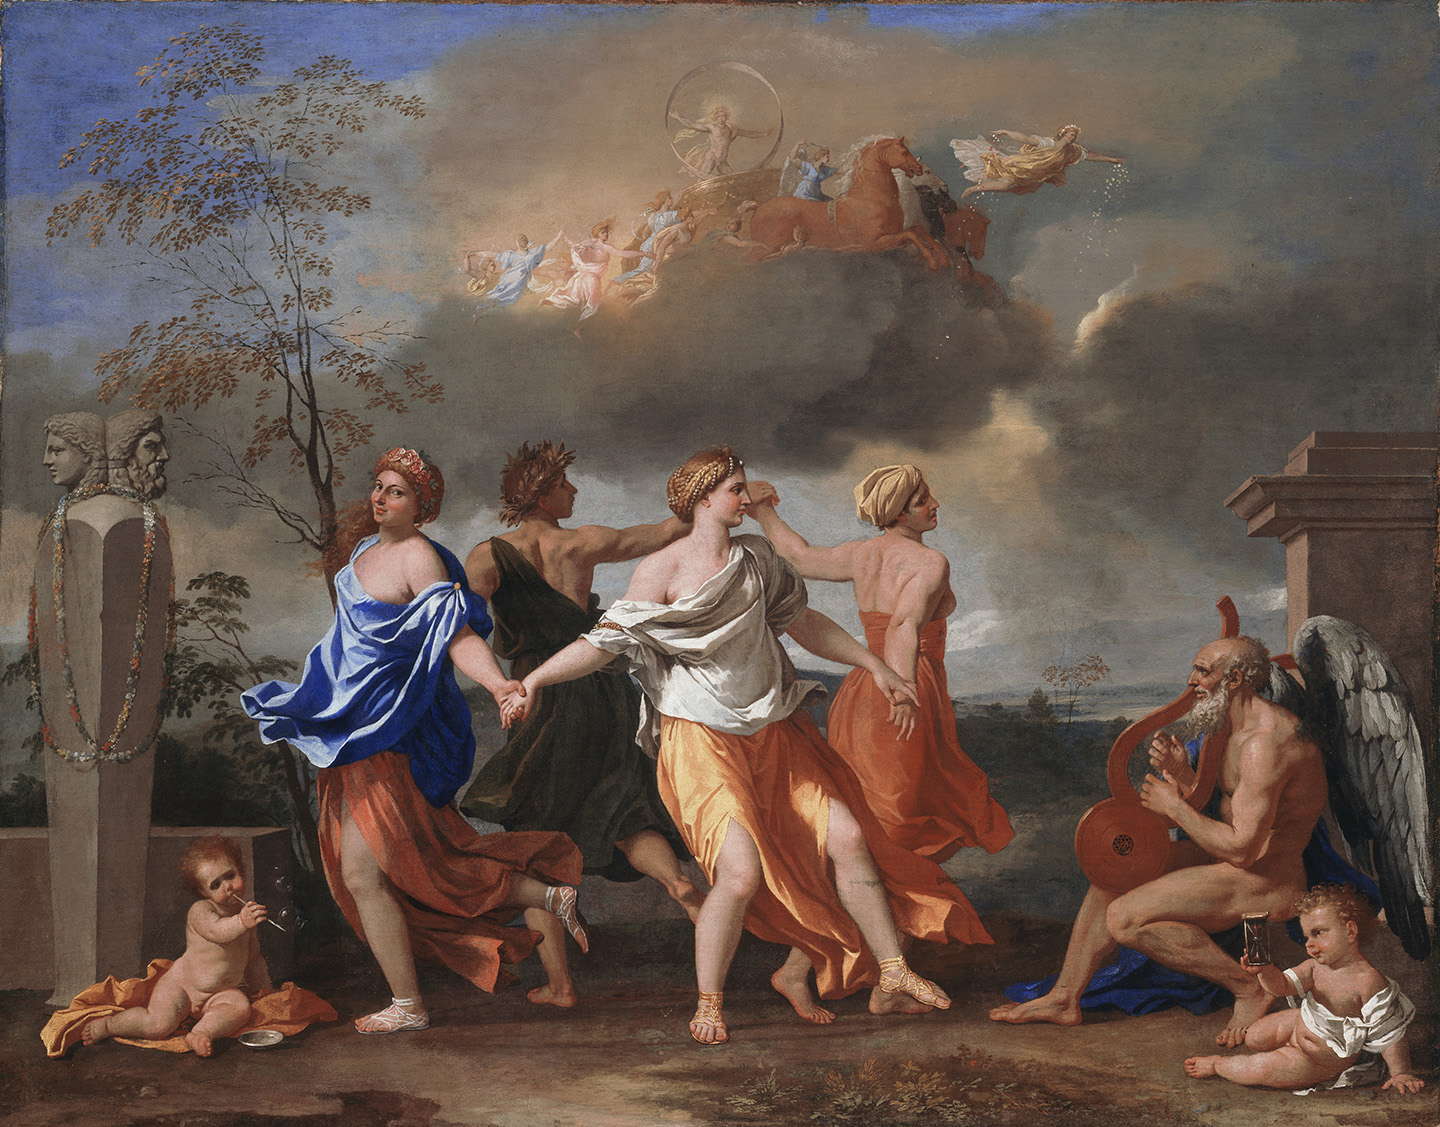 Nicolas Poussin, “A Dance to the Music of Time,” 